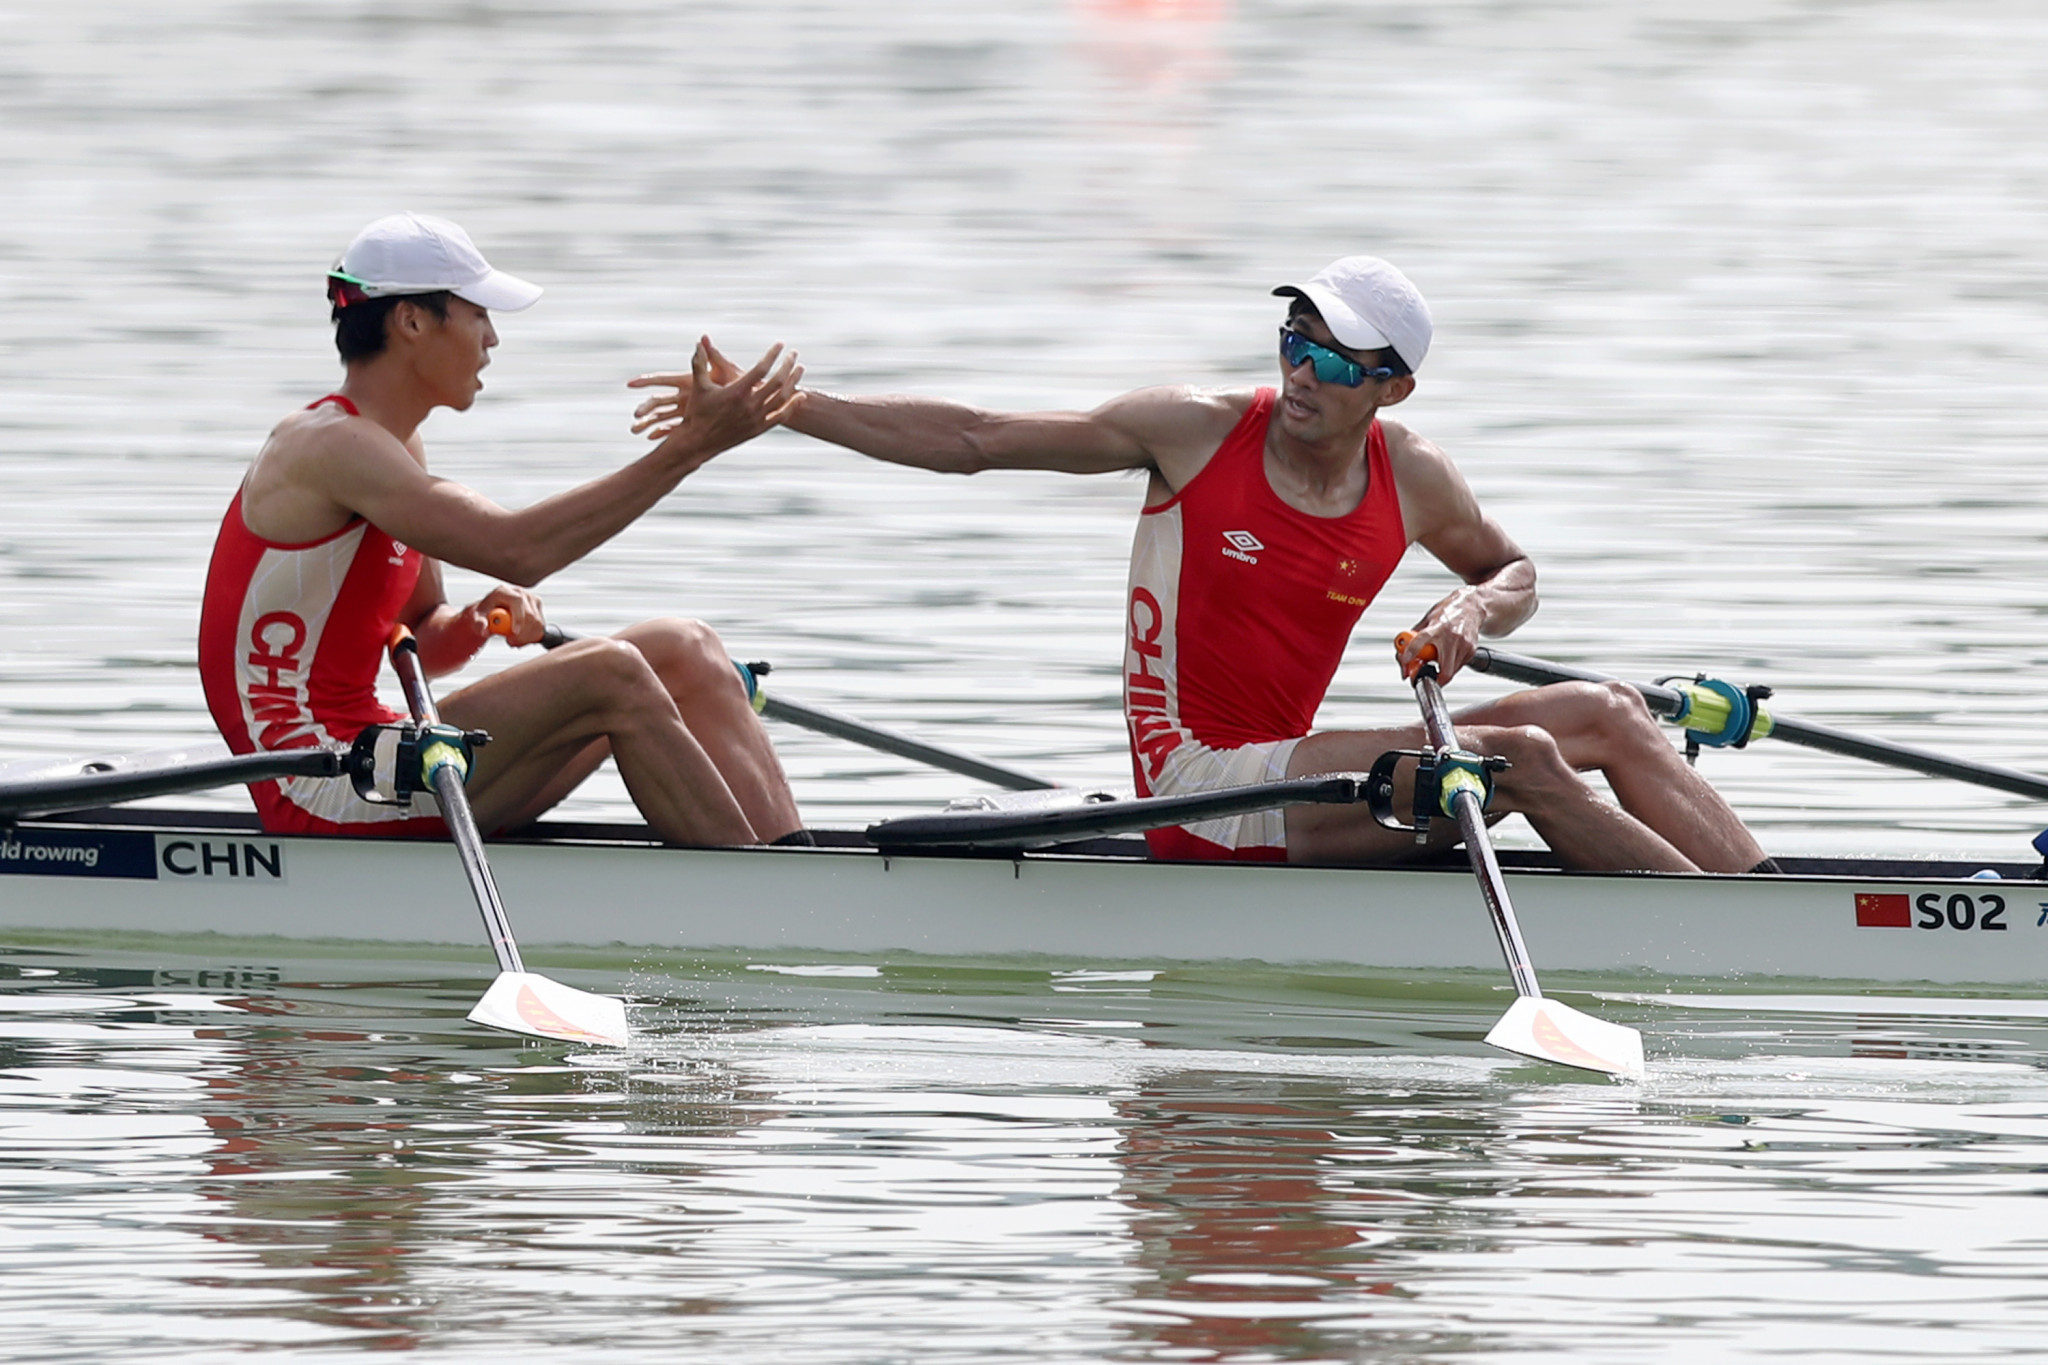 Lightweight rowing looks likely to be dropped from the Olympics ©Getty Images